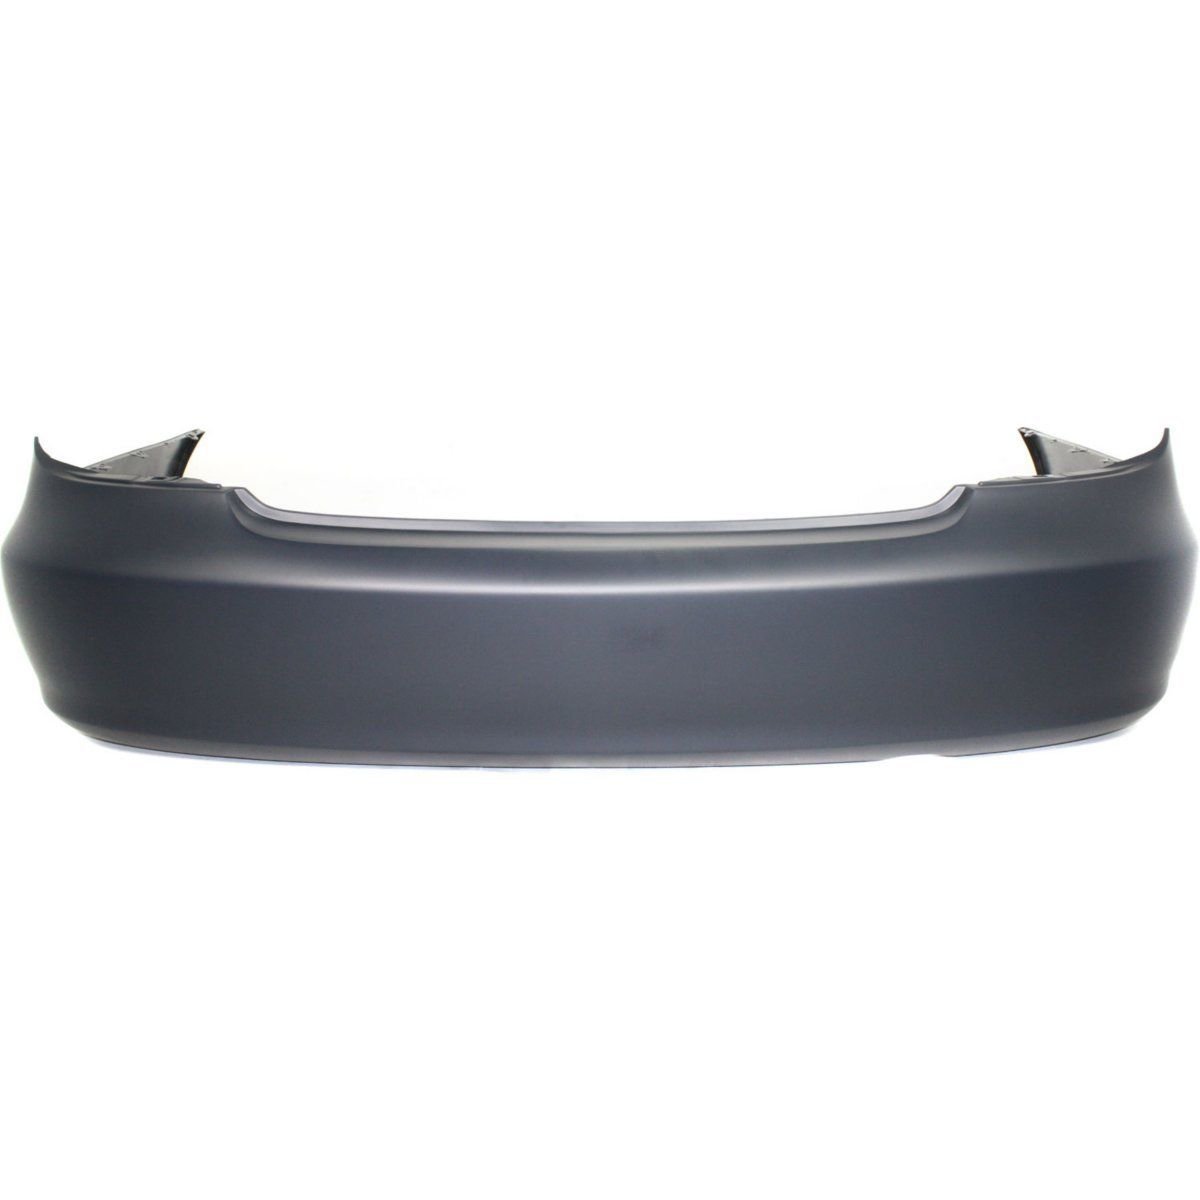 2002-2006 TOYOTA CAMRY Rear Bumper Cover USA built Painted to Match